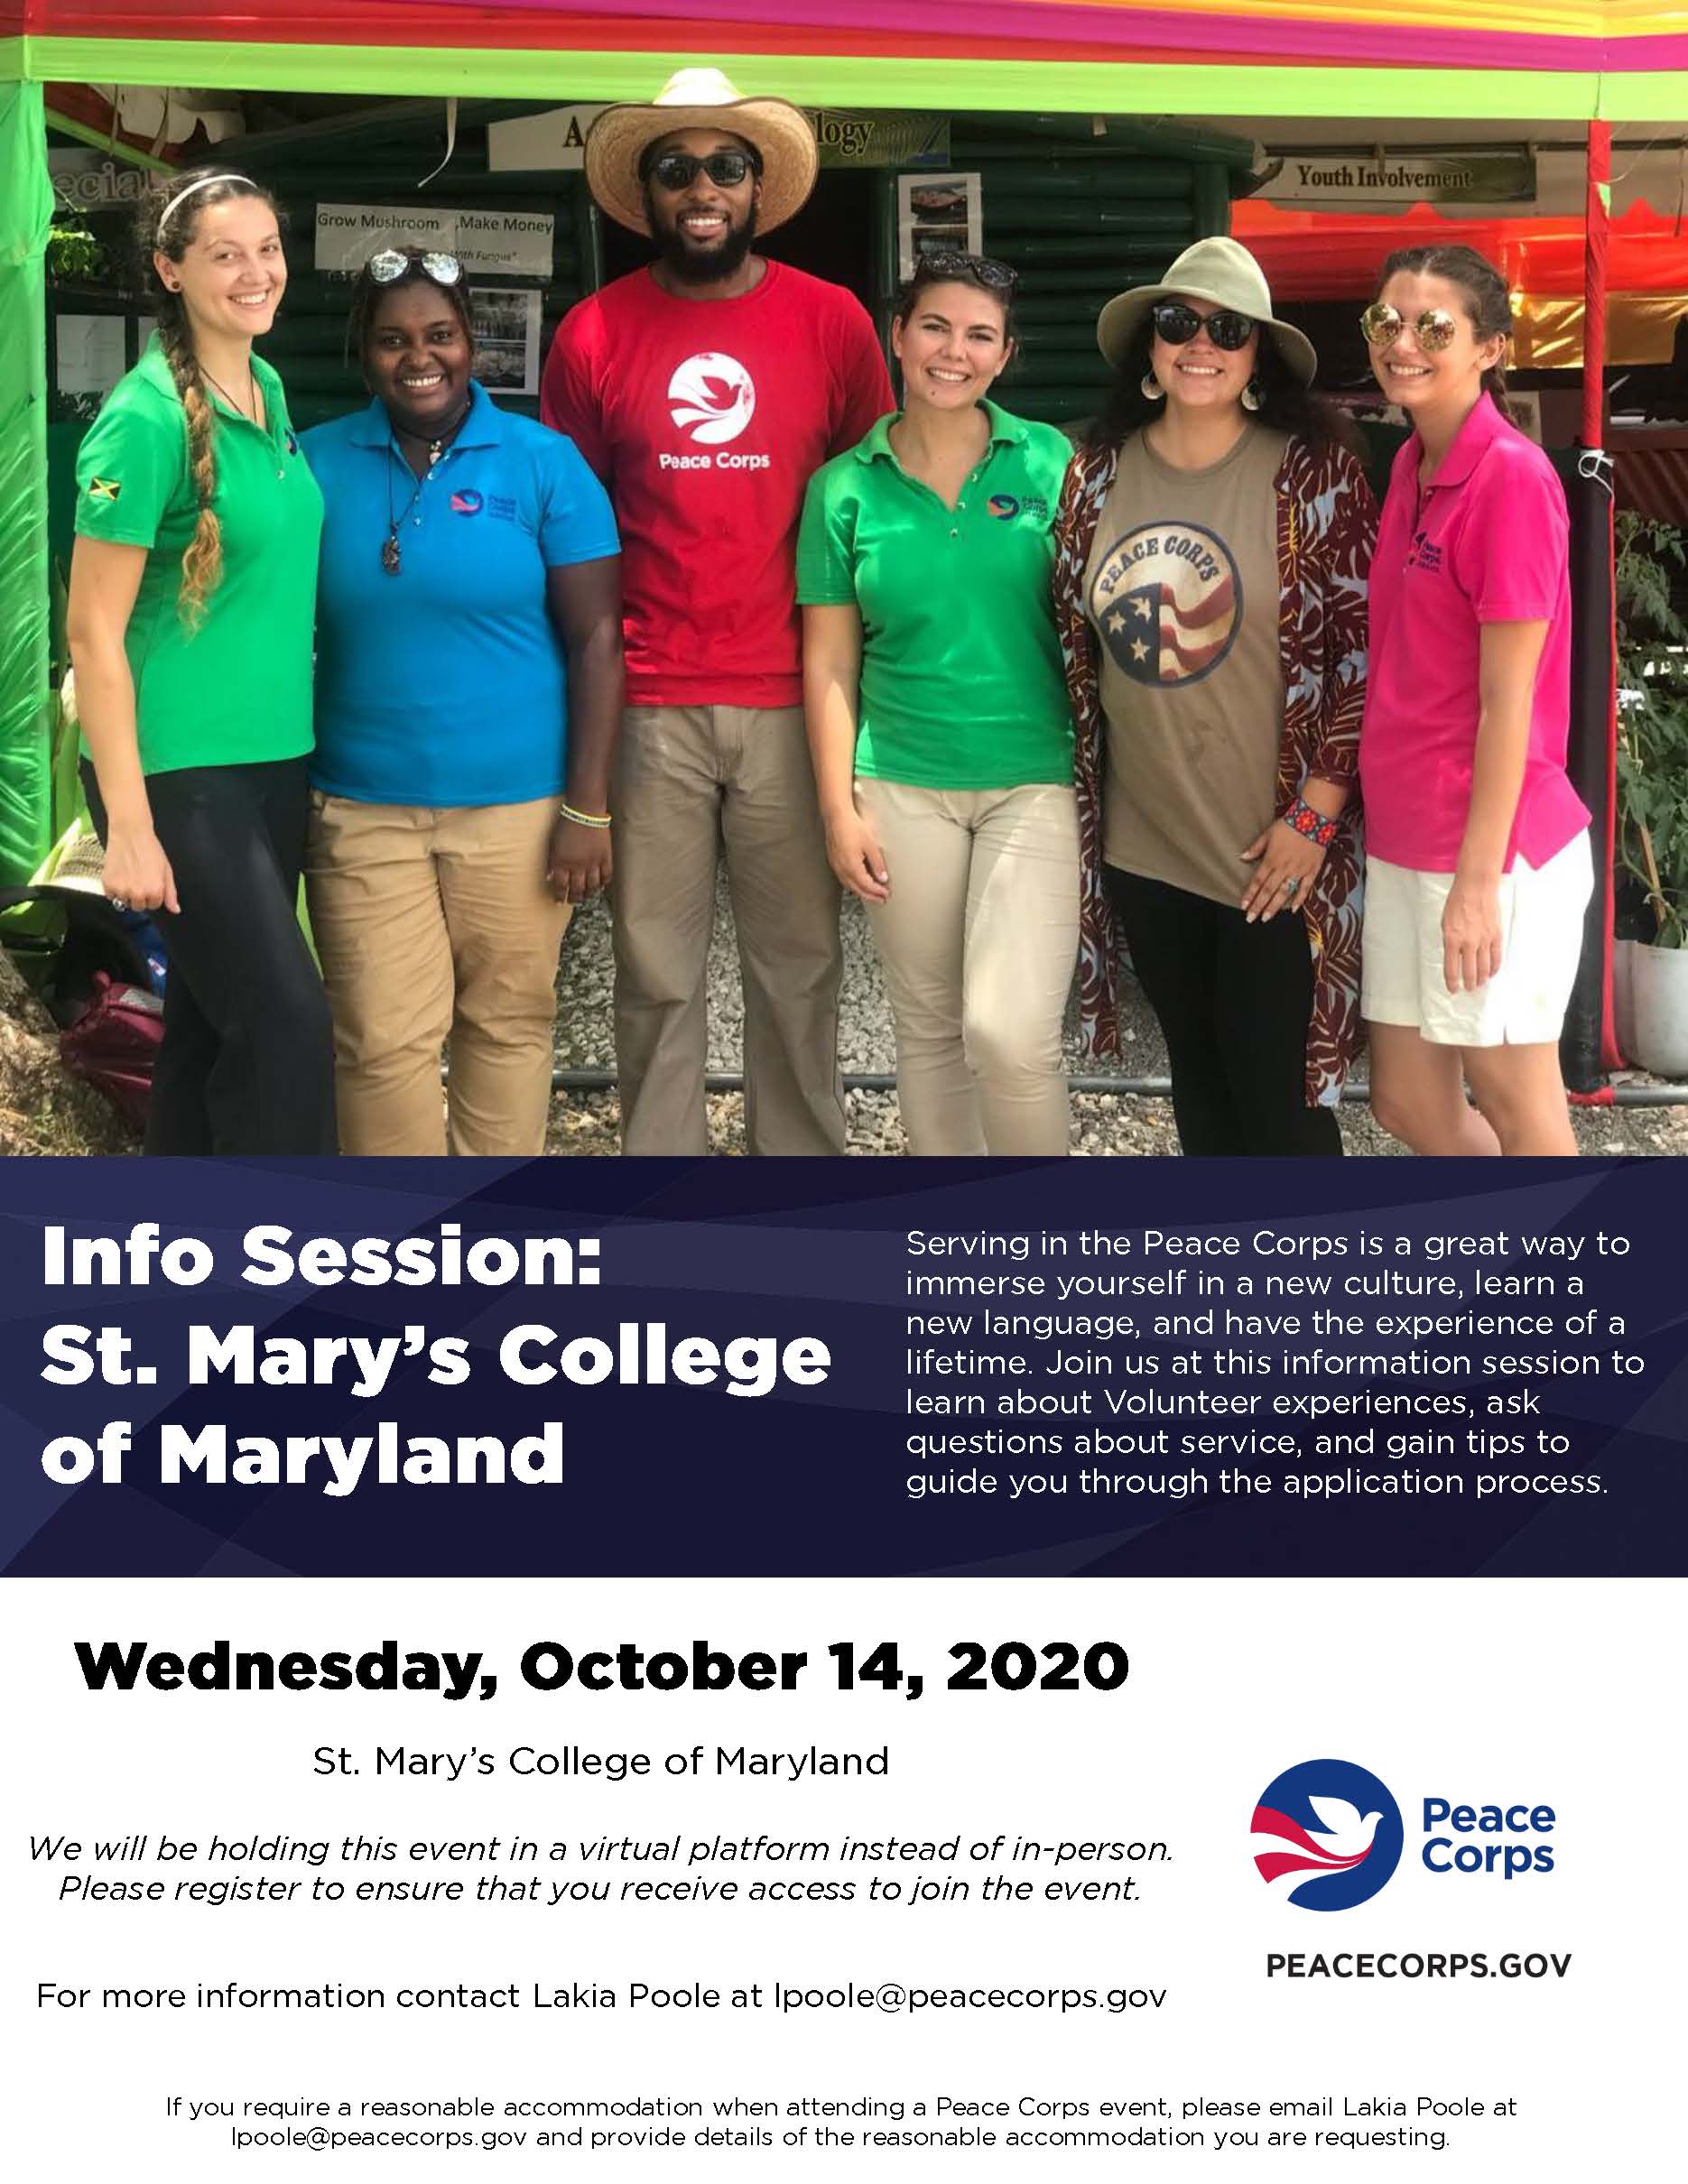 Peace Corps Info Session Wednesday, October 14, 2020 from 2pm-3pm